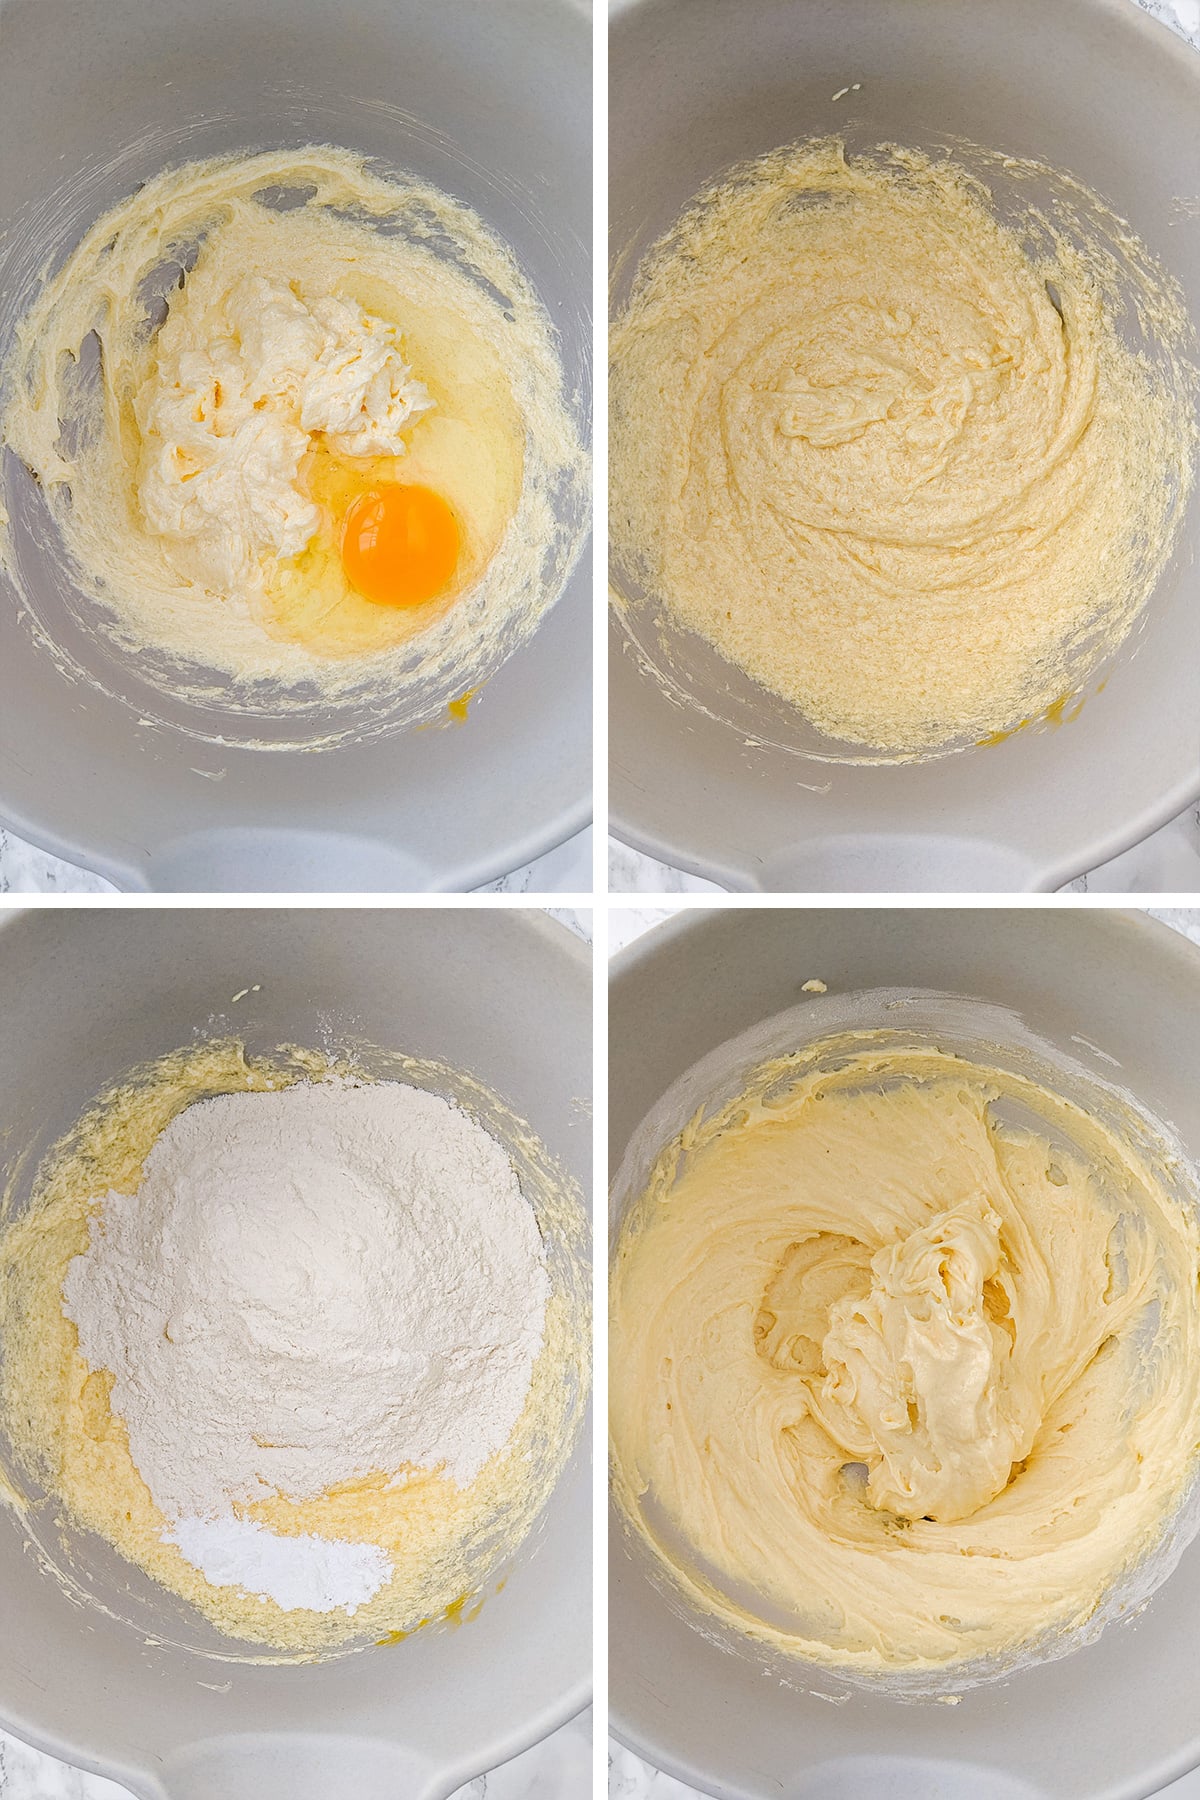 Mixing ingredients for a sponge cake baked in air fryer.